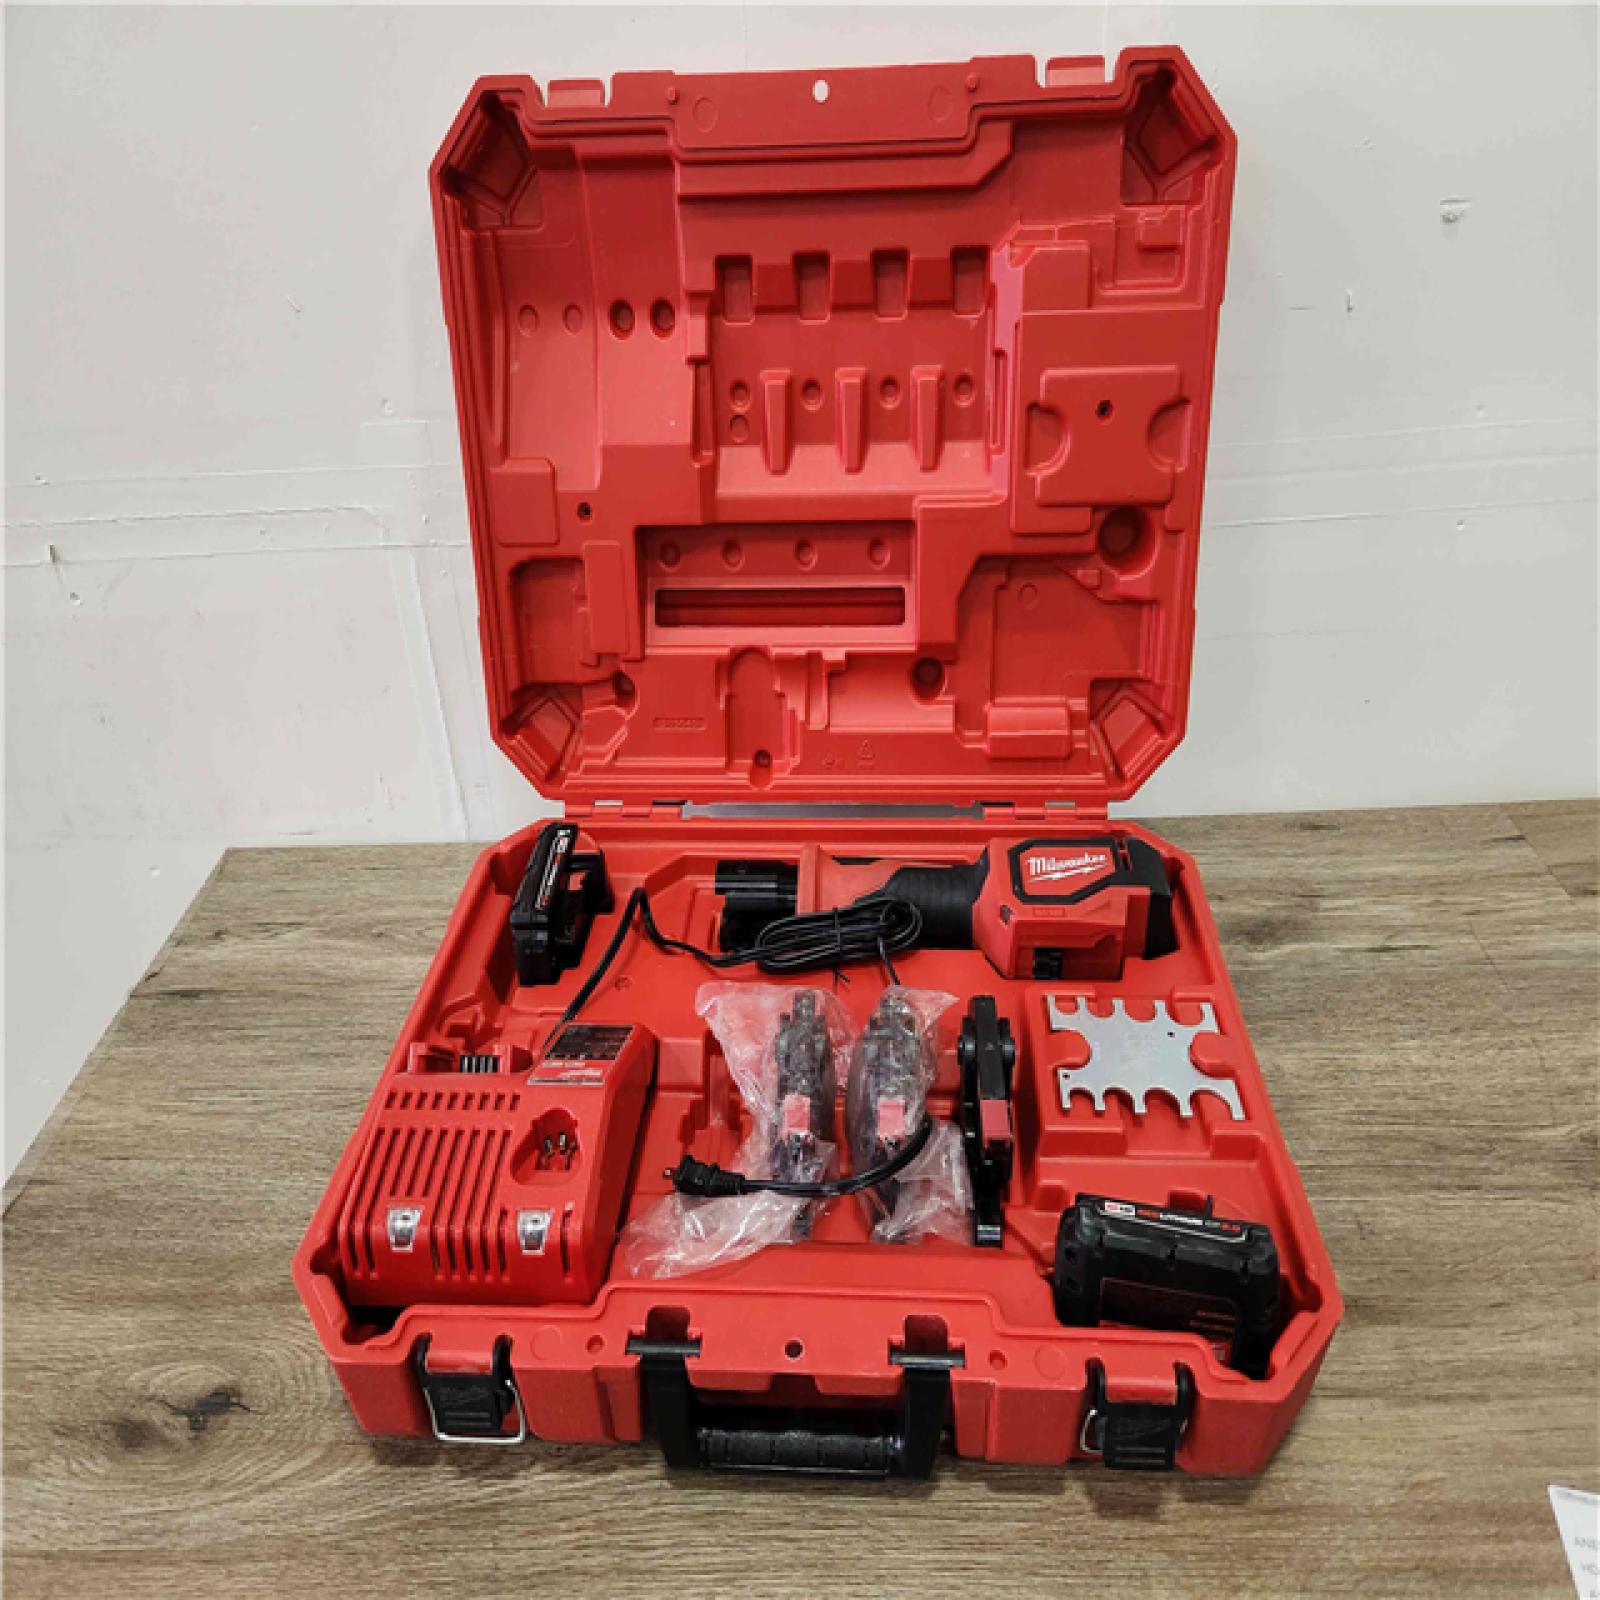 Phoenix Location Appears NEW Milwaukee M18 18V Lithium-Ion Cordless Short Throw Press Tool Kit with 3 PEX Crimp Jaws (2) 2.0 Ah Batteries and Charger 2674-22C